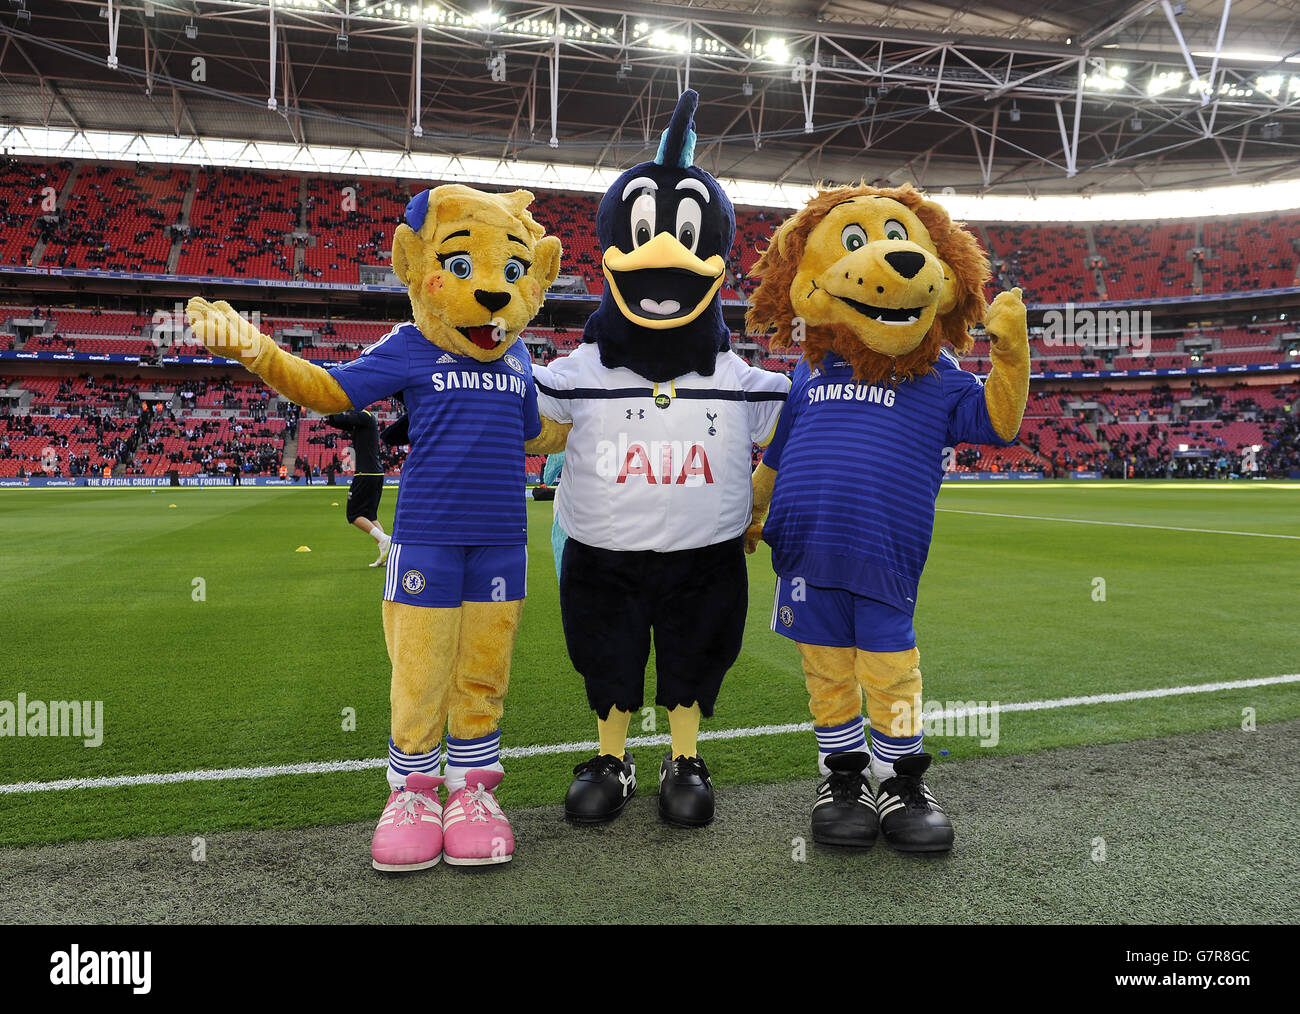 Tottenham Hotspur Mascot High Resolution Stock Photography And Images Alamy